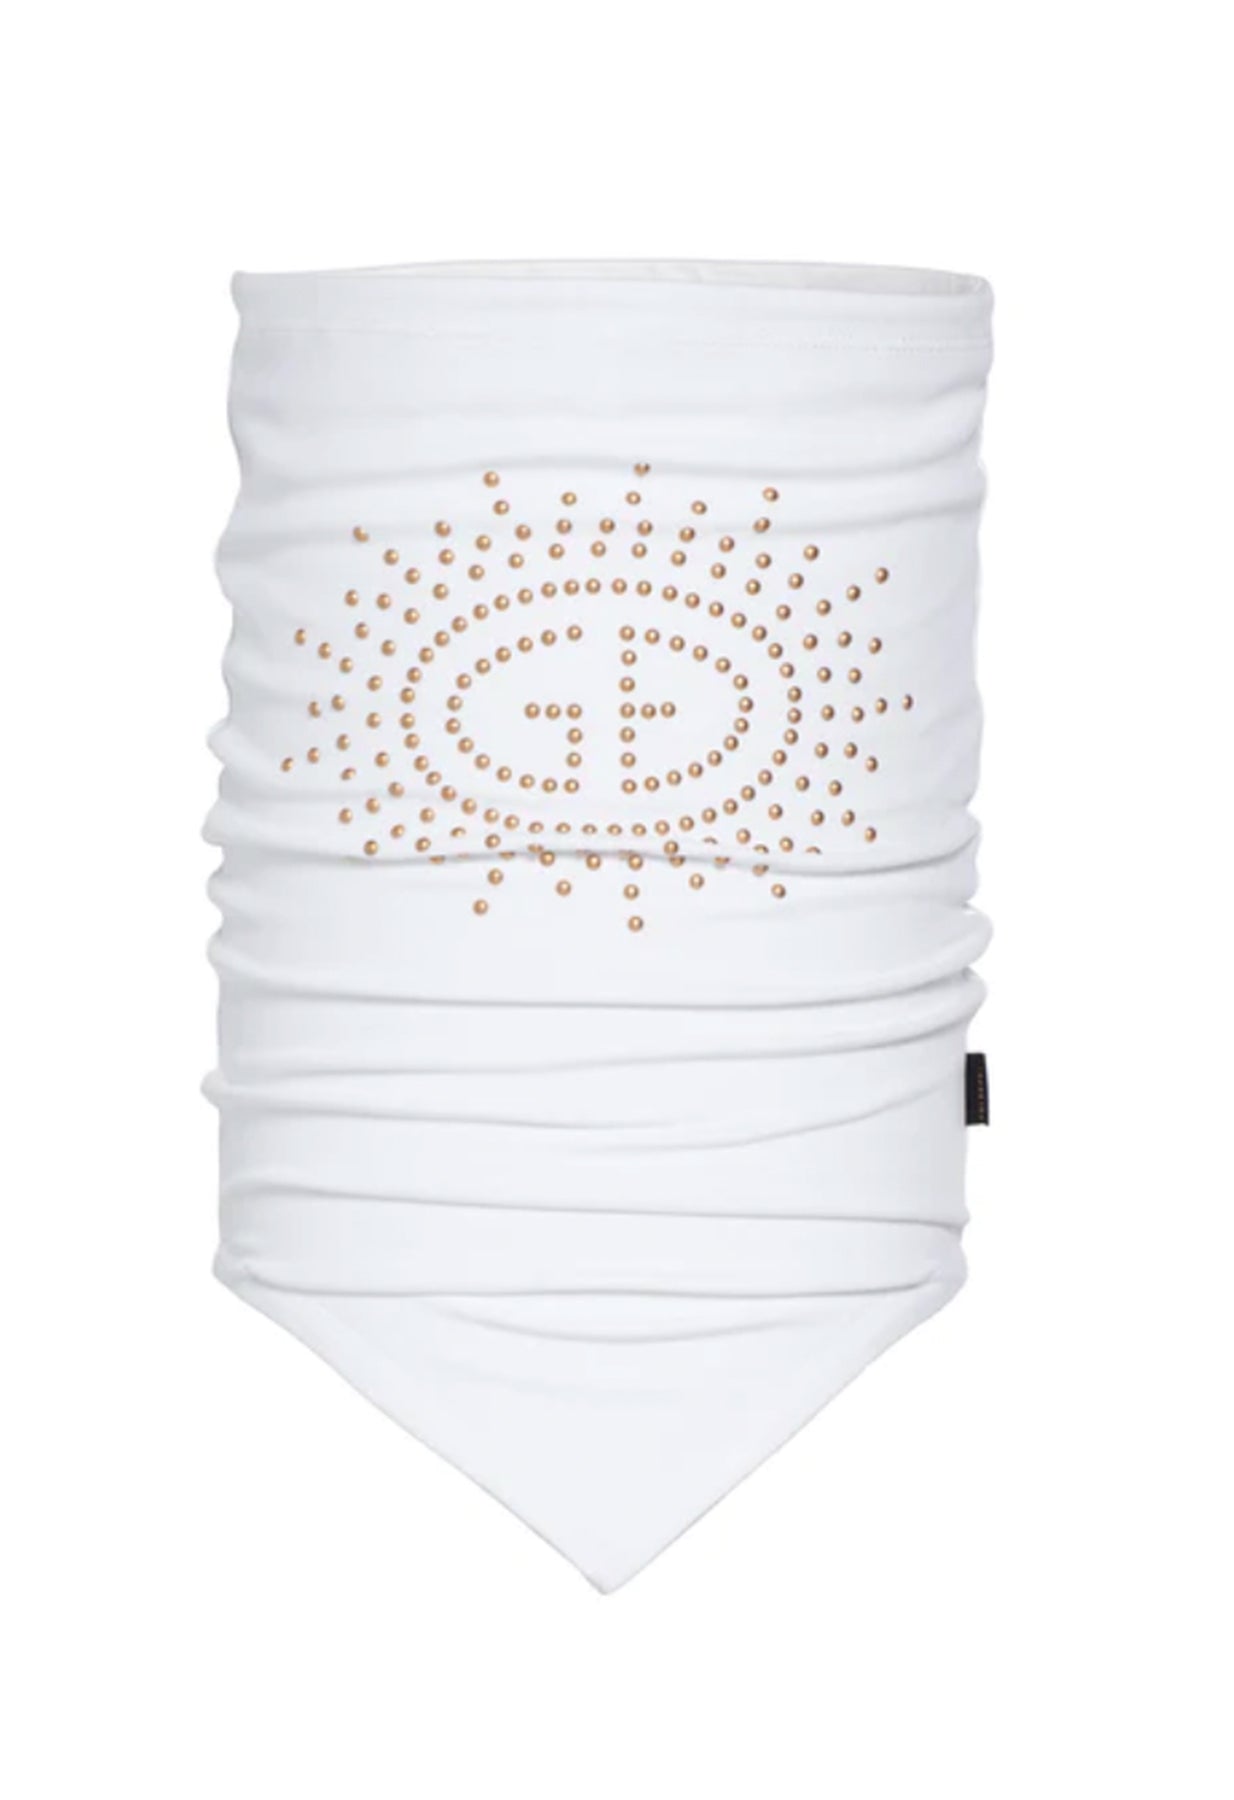 Goldbergh Stud Scarf Neckwarmer in White with Gold Studs